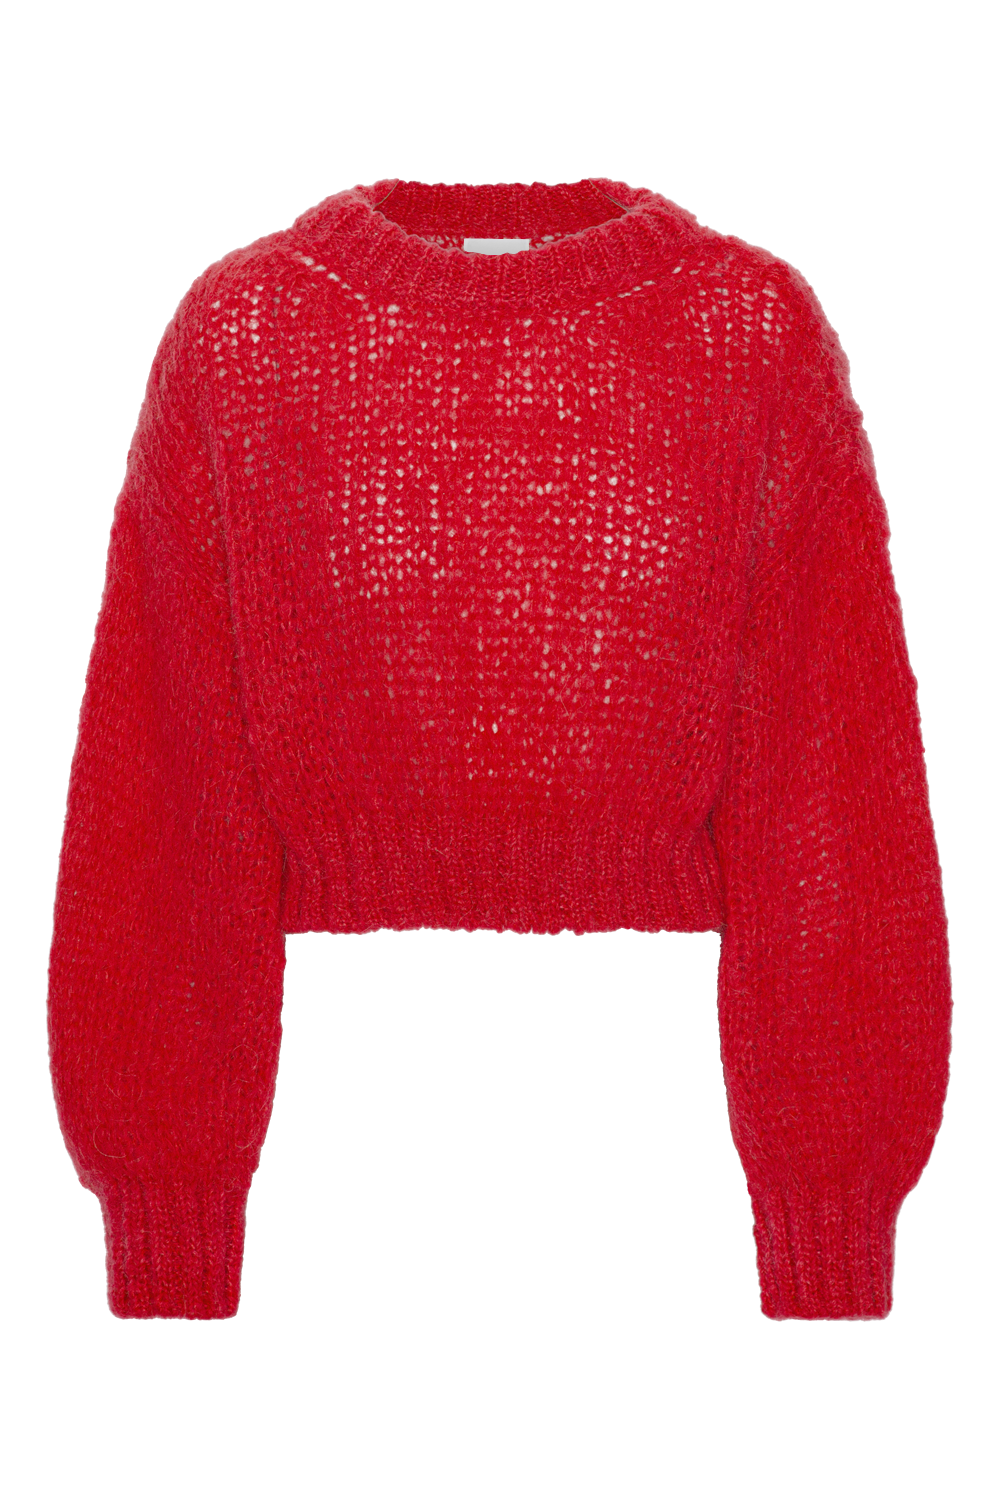 Leonnie Alpaca Cropped Pullover Ruby Red